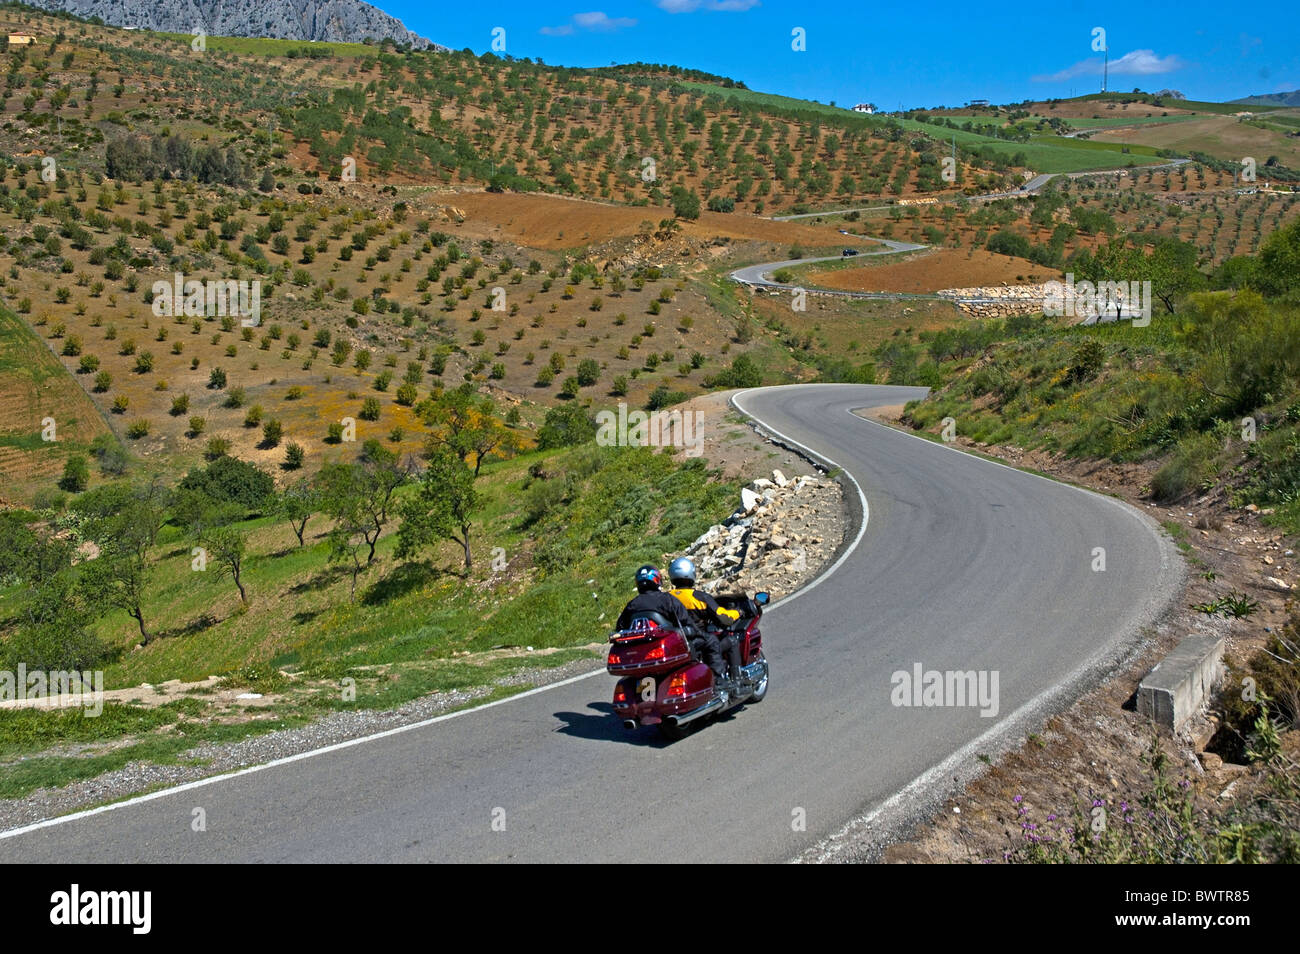 Andalucia, Spain - Motorcycling through rural countryside full of olive trees between Alora and Antequera, Andalusia, Spain. Stock Photo